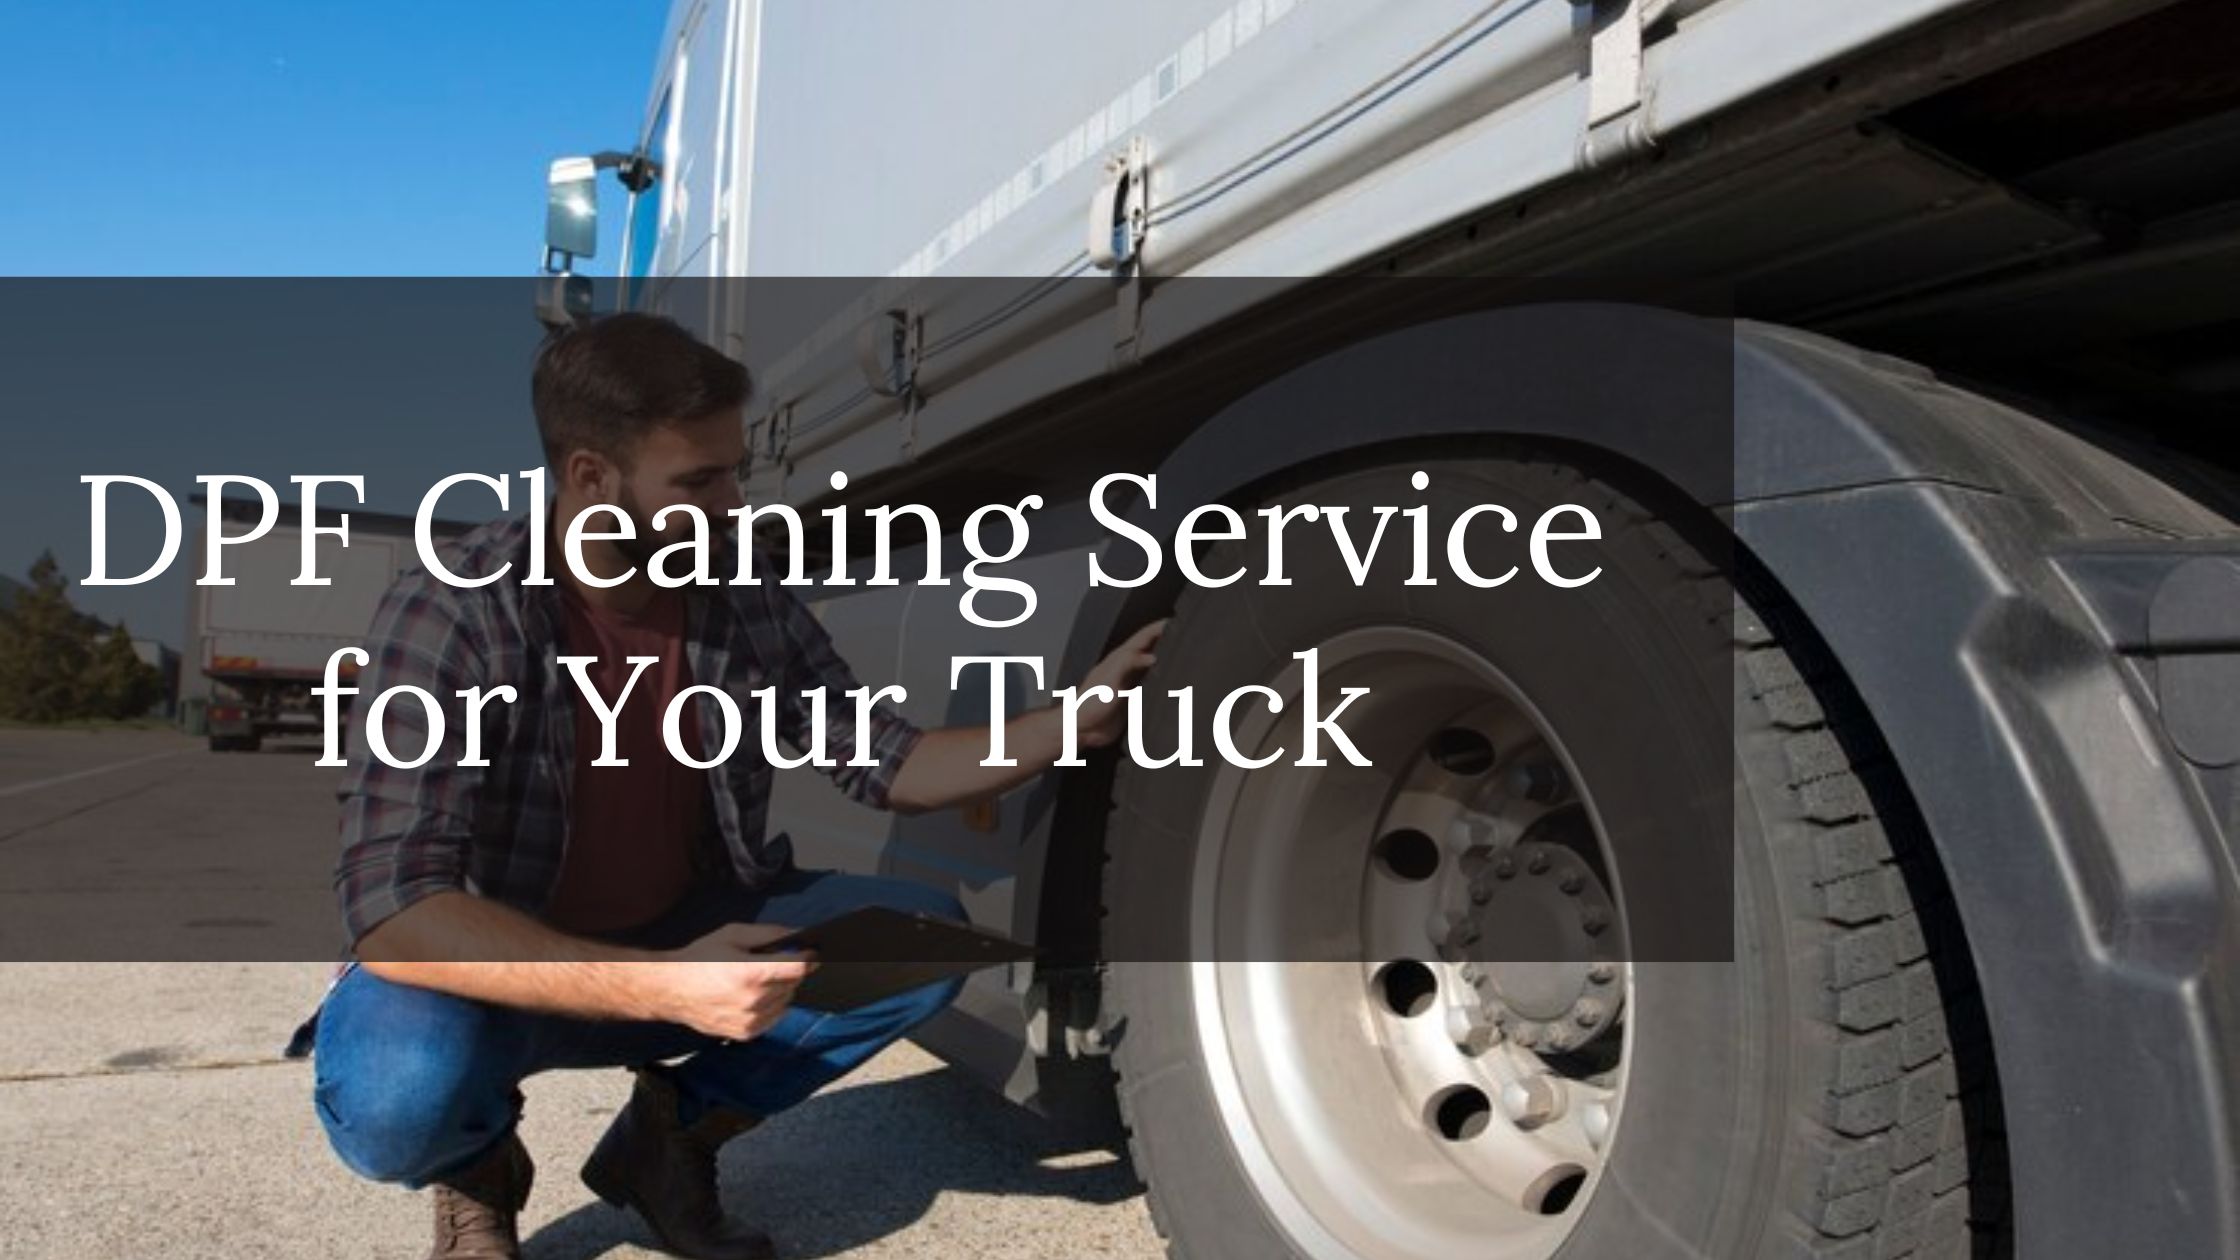 How to Choose the Best DPF Cleaning Service for Your Truck